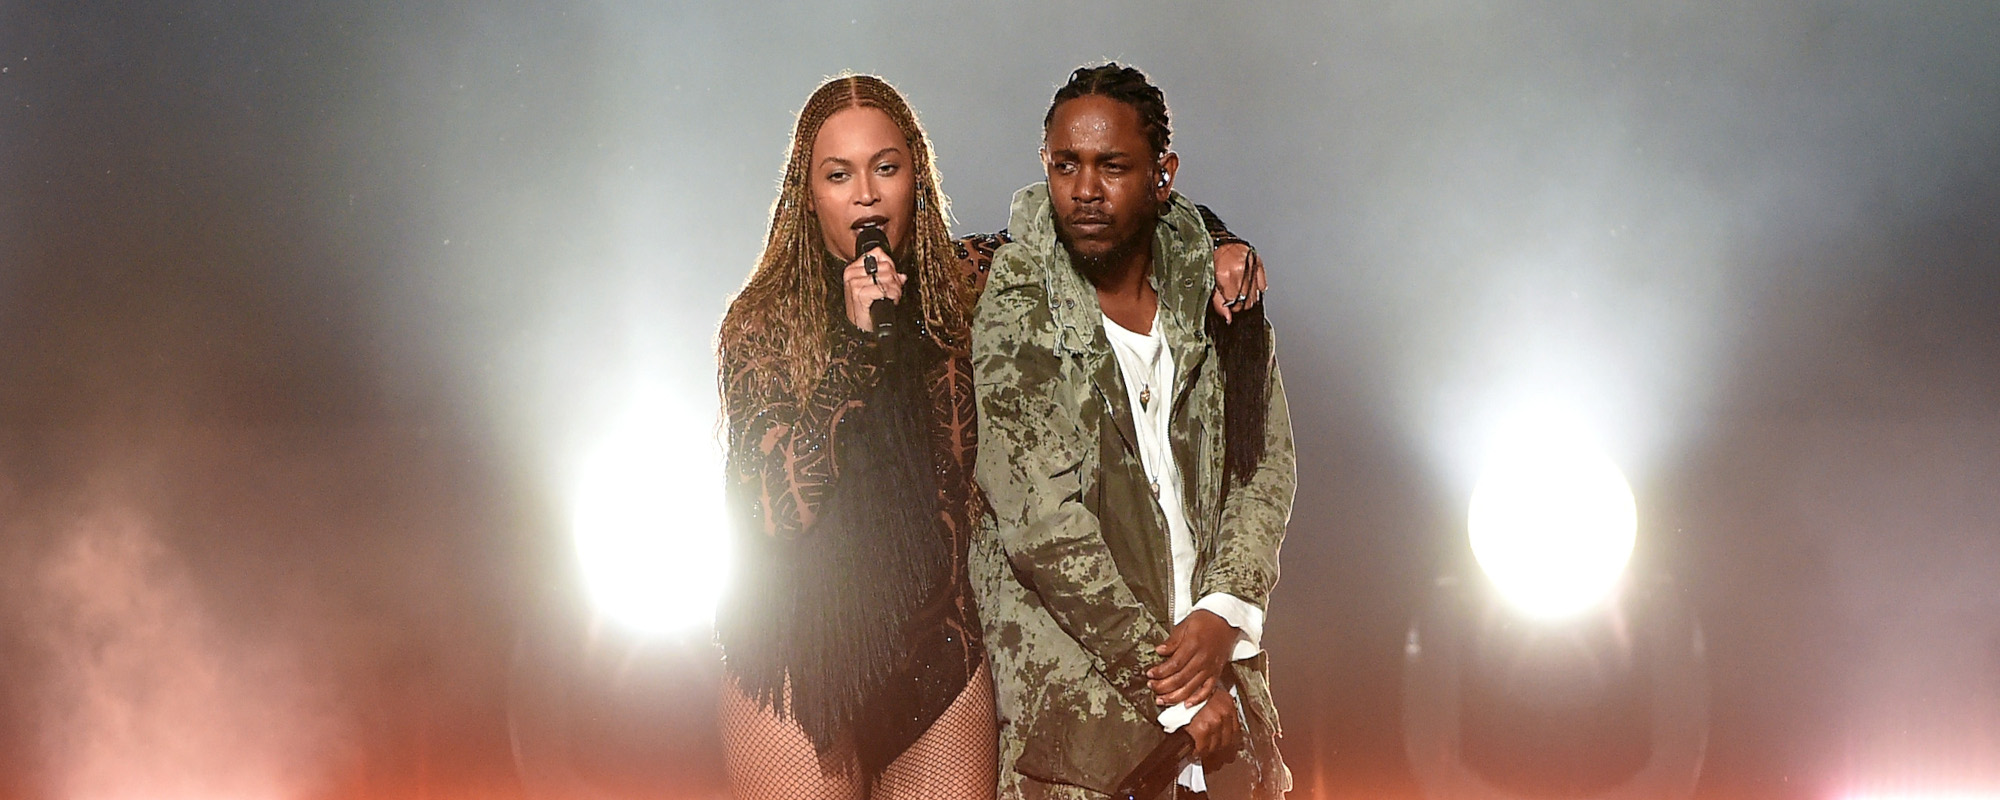 Beyoncé and Kendrick Lamar Team Up For First Time Since 2016 on “America Has a Problem” Remix